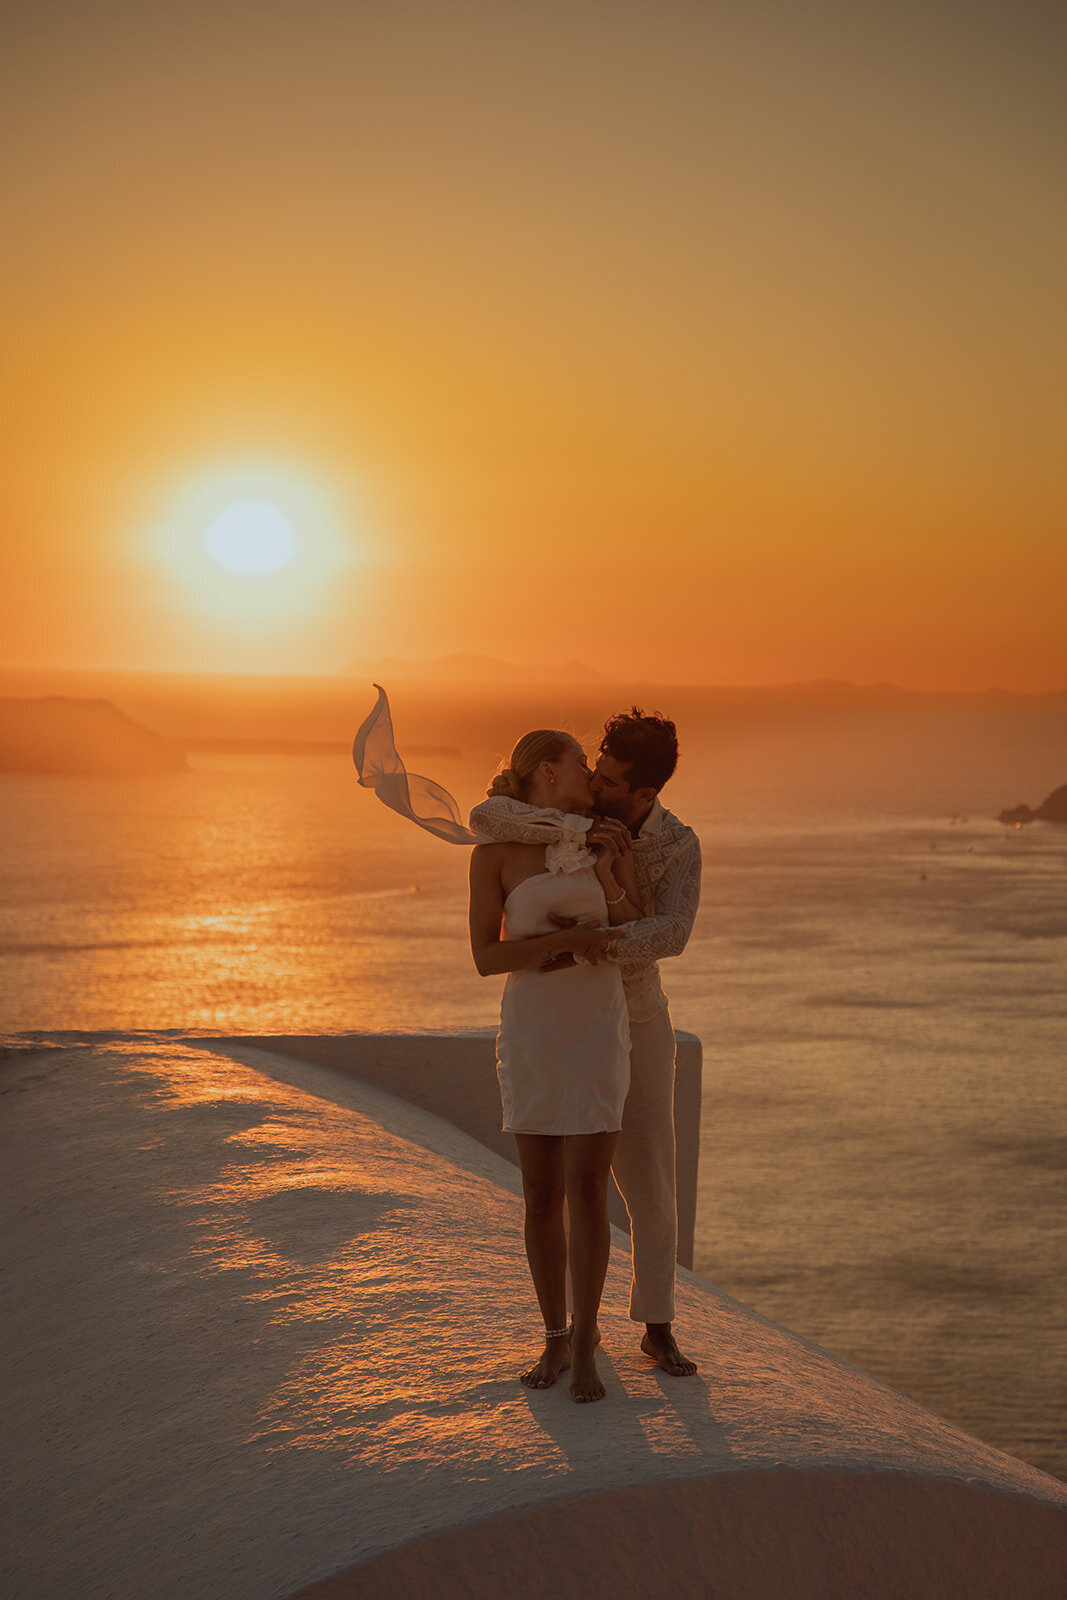 santorini-greece-cathedral-elopement-blue-dome-romantic-timeless-sunset-europe-336